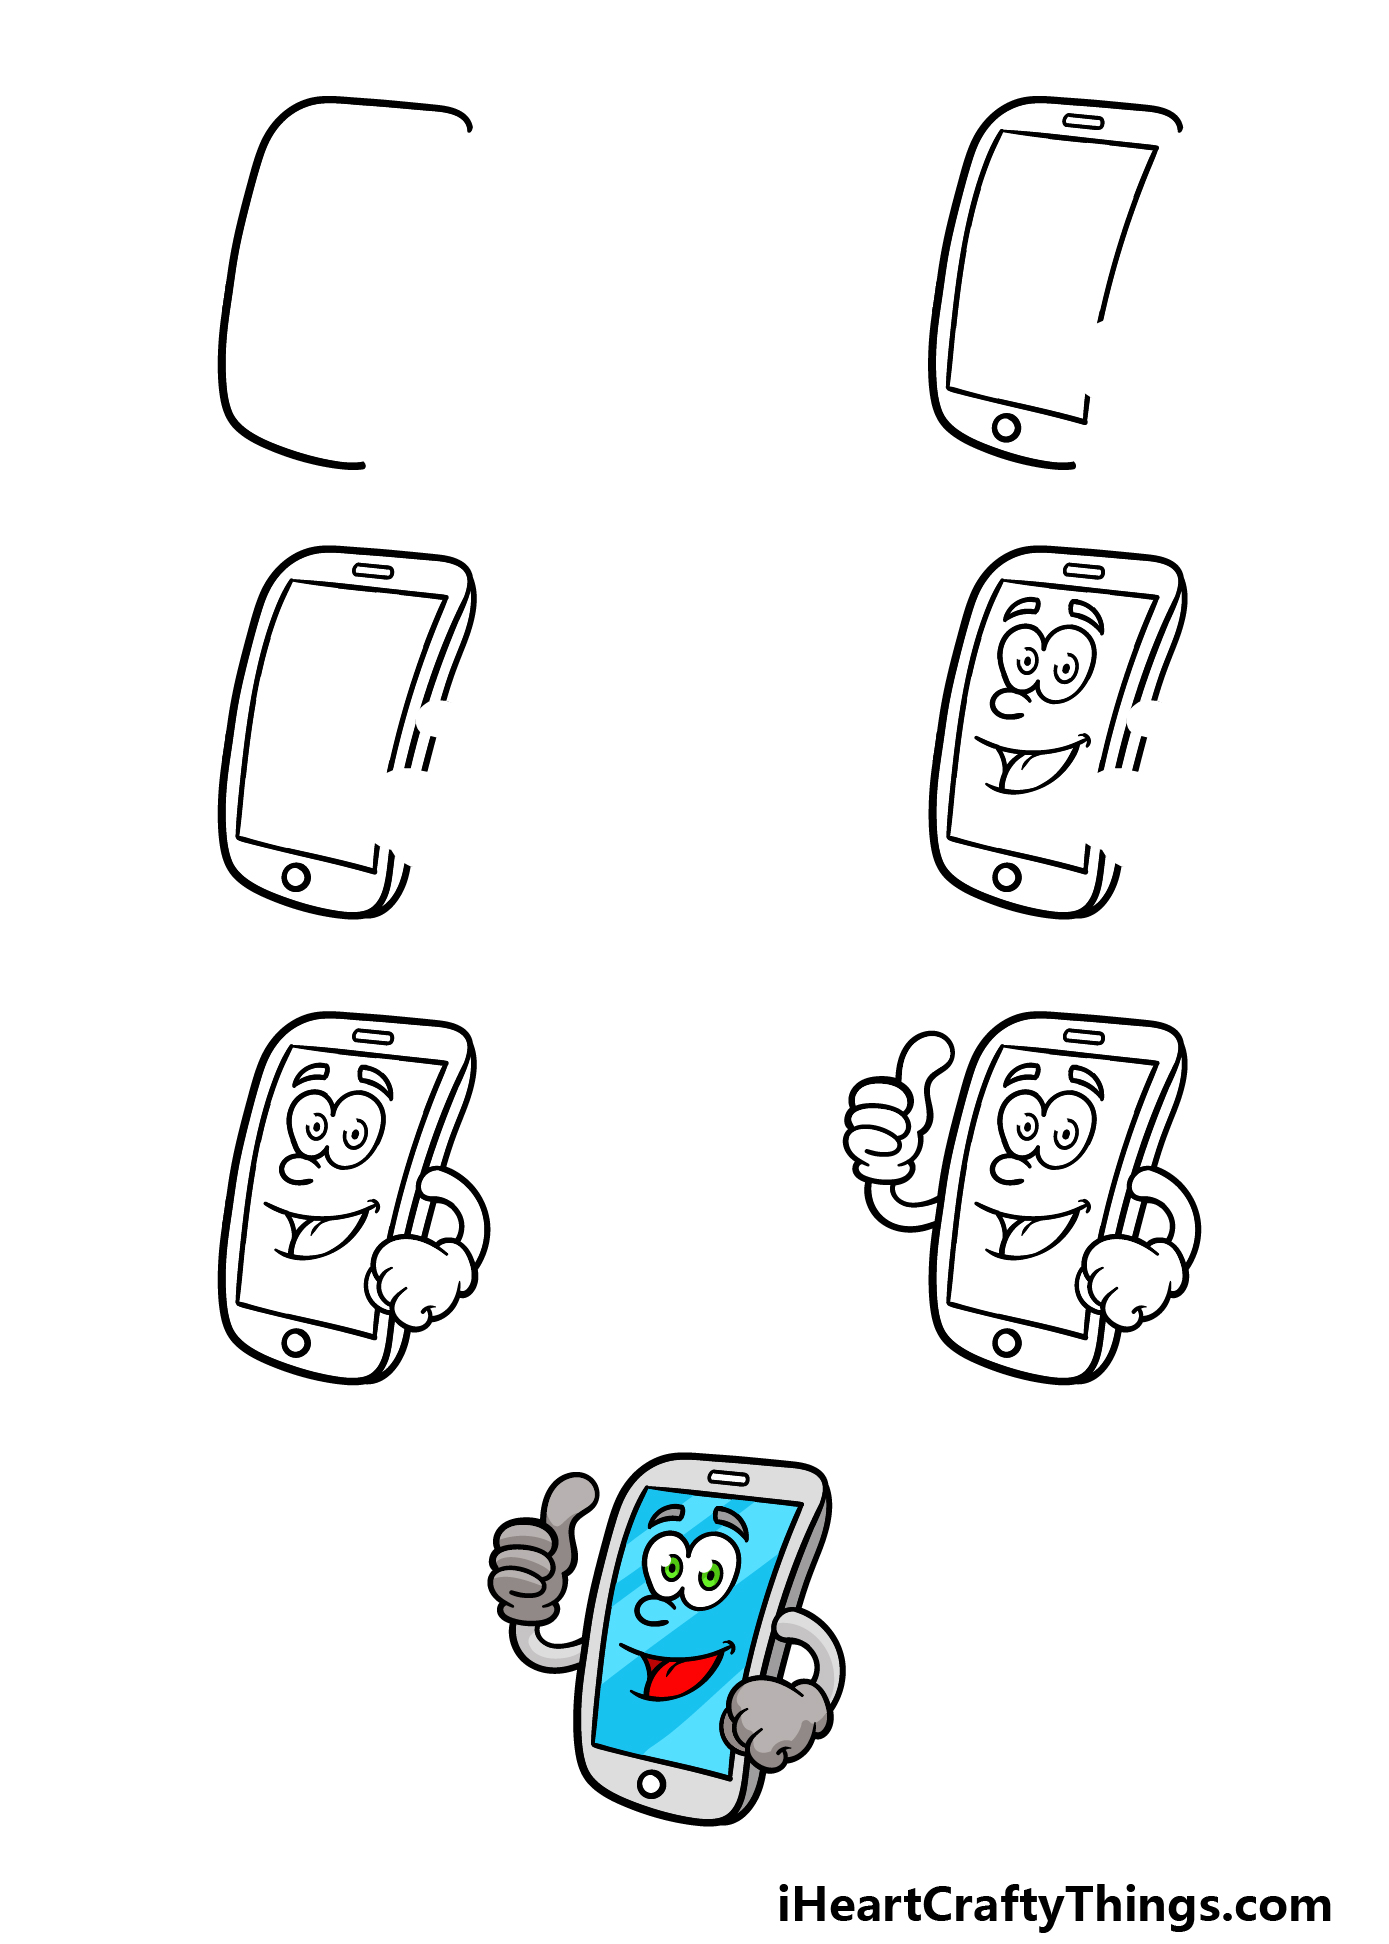 how to draw a cartoon phone in 7 steps